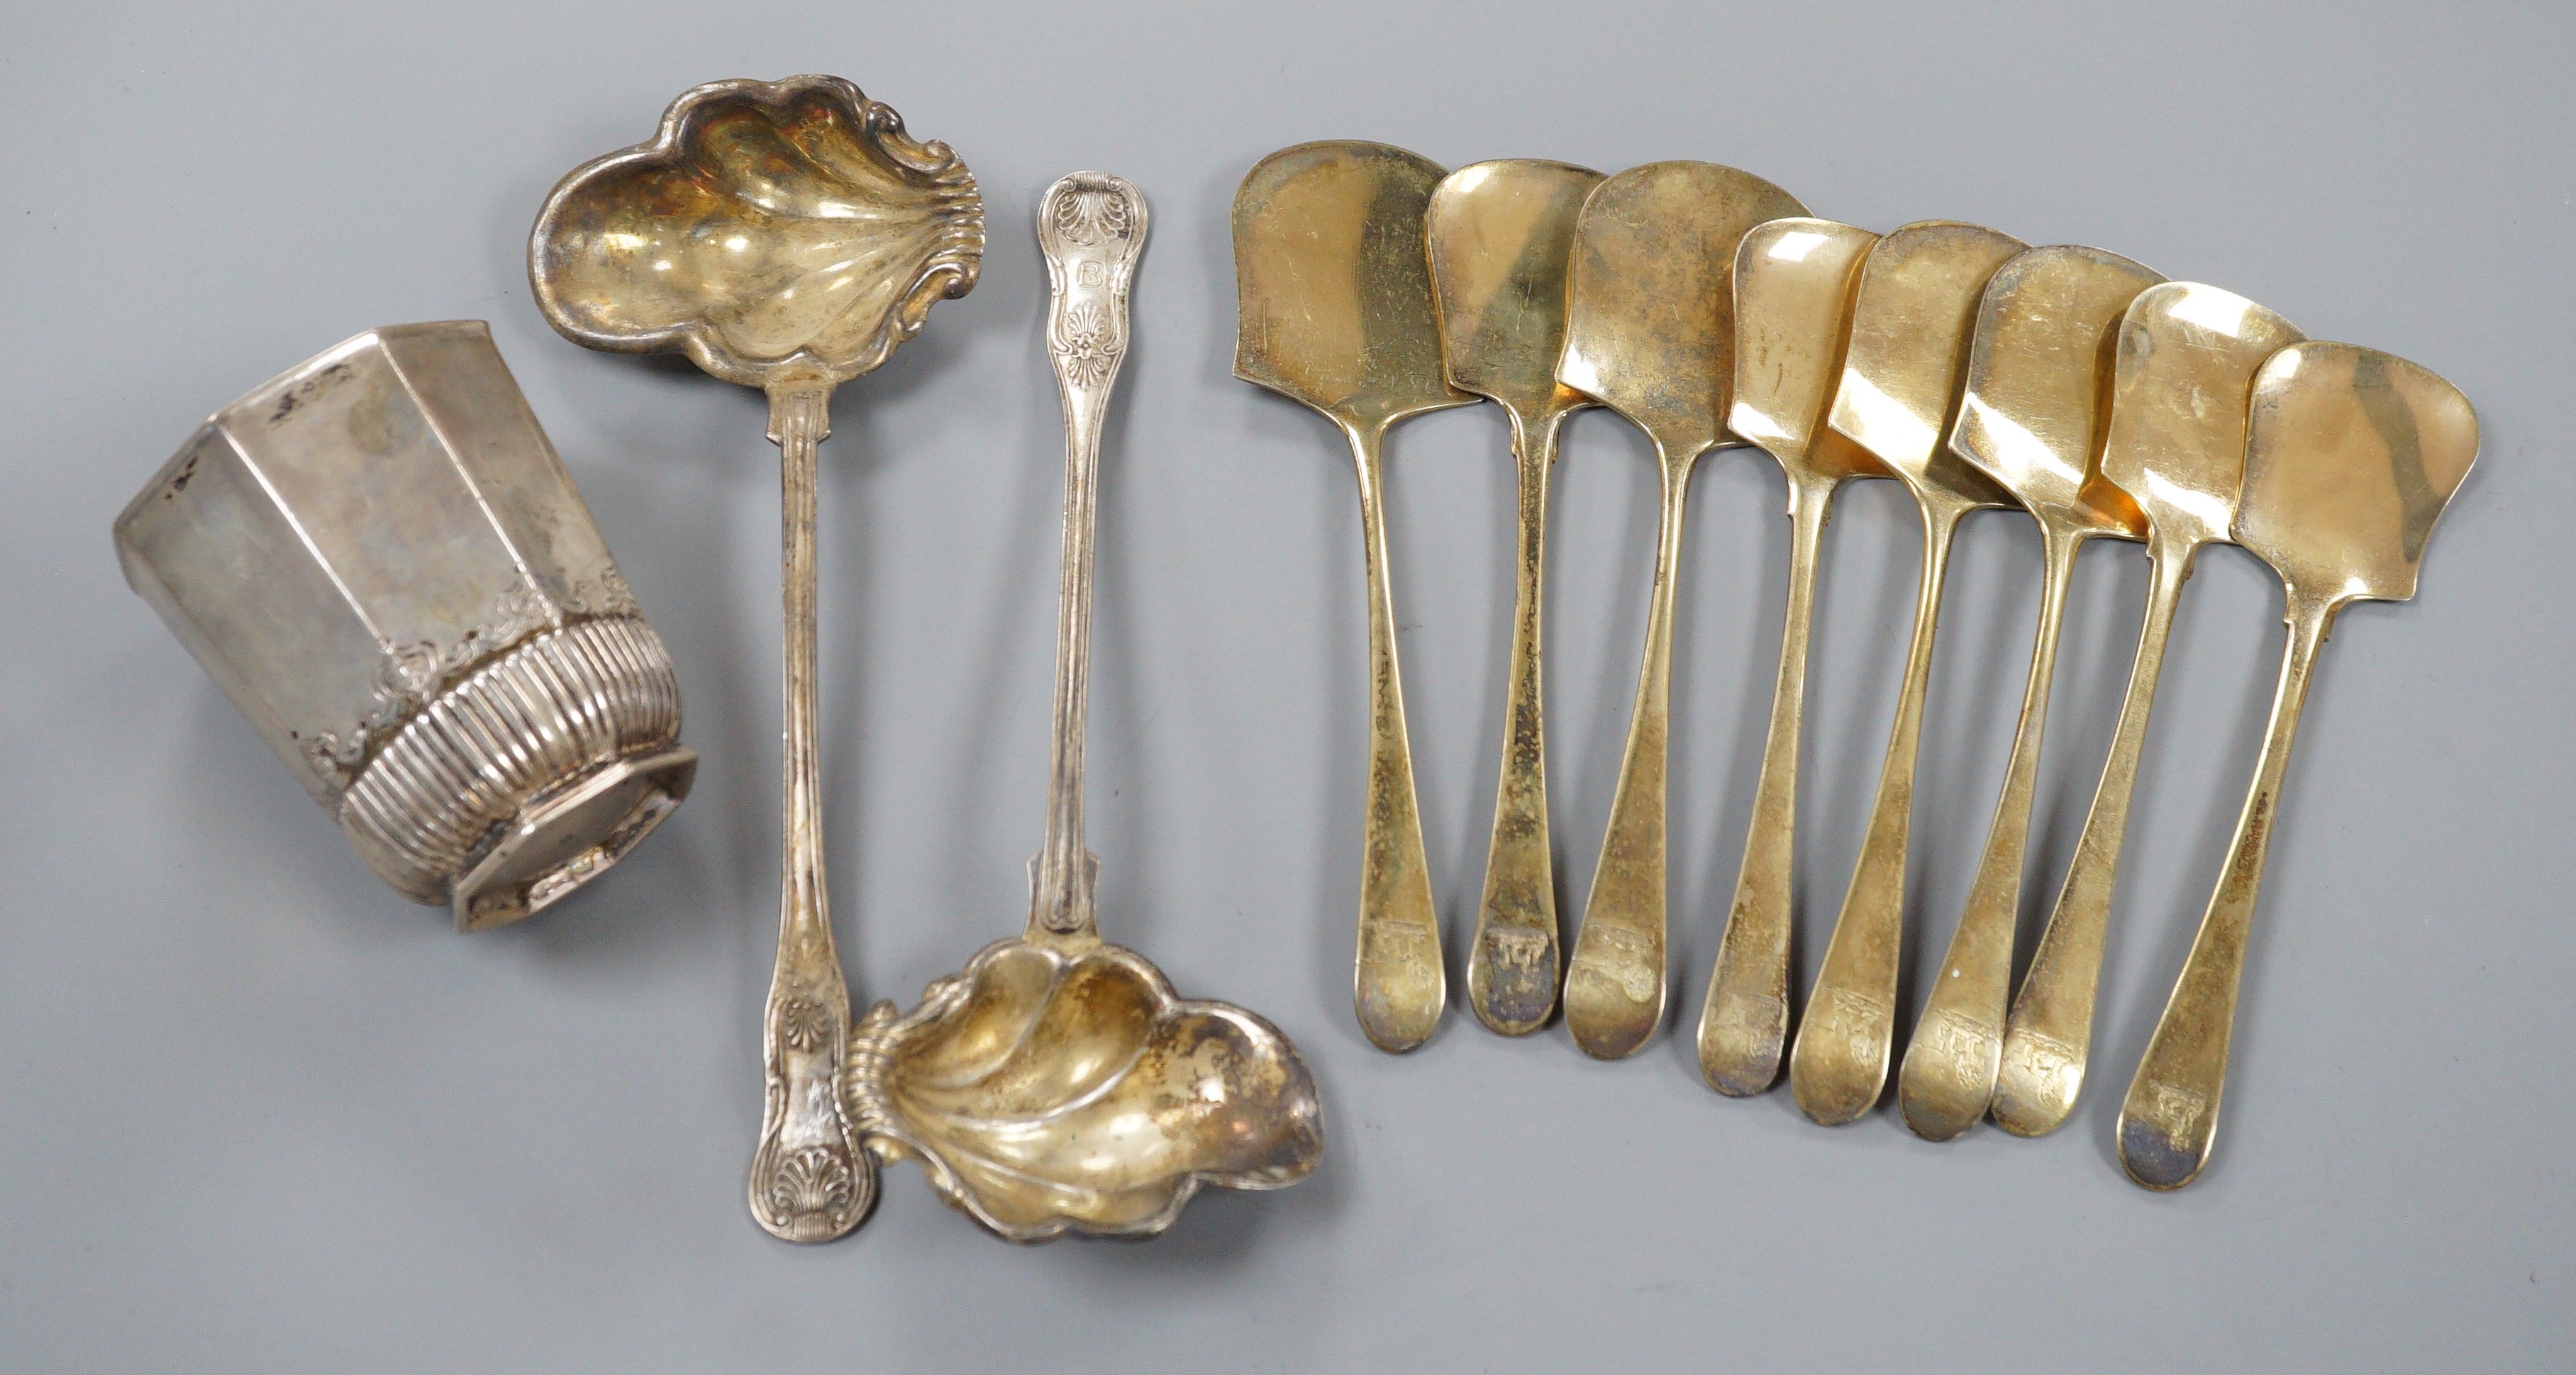 Eight late 18th century/early 19th century French gilt white metal servers, a pair of Swedish ladles and a 19th century German? beaker.